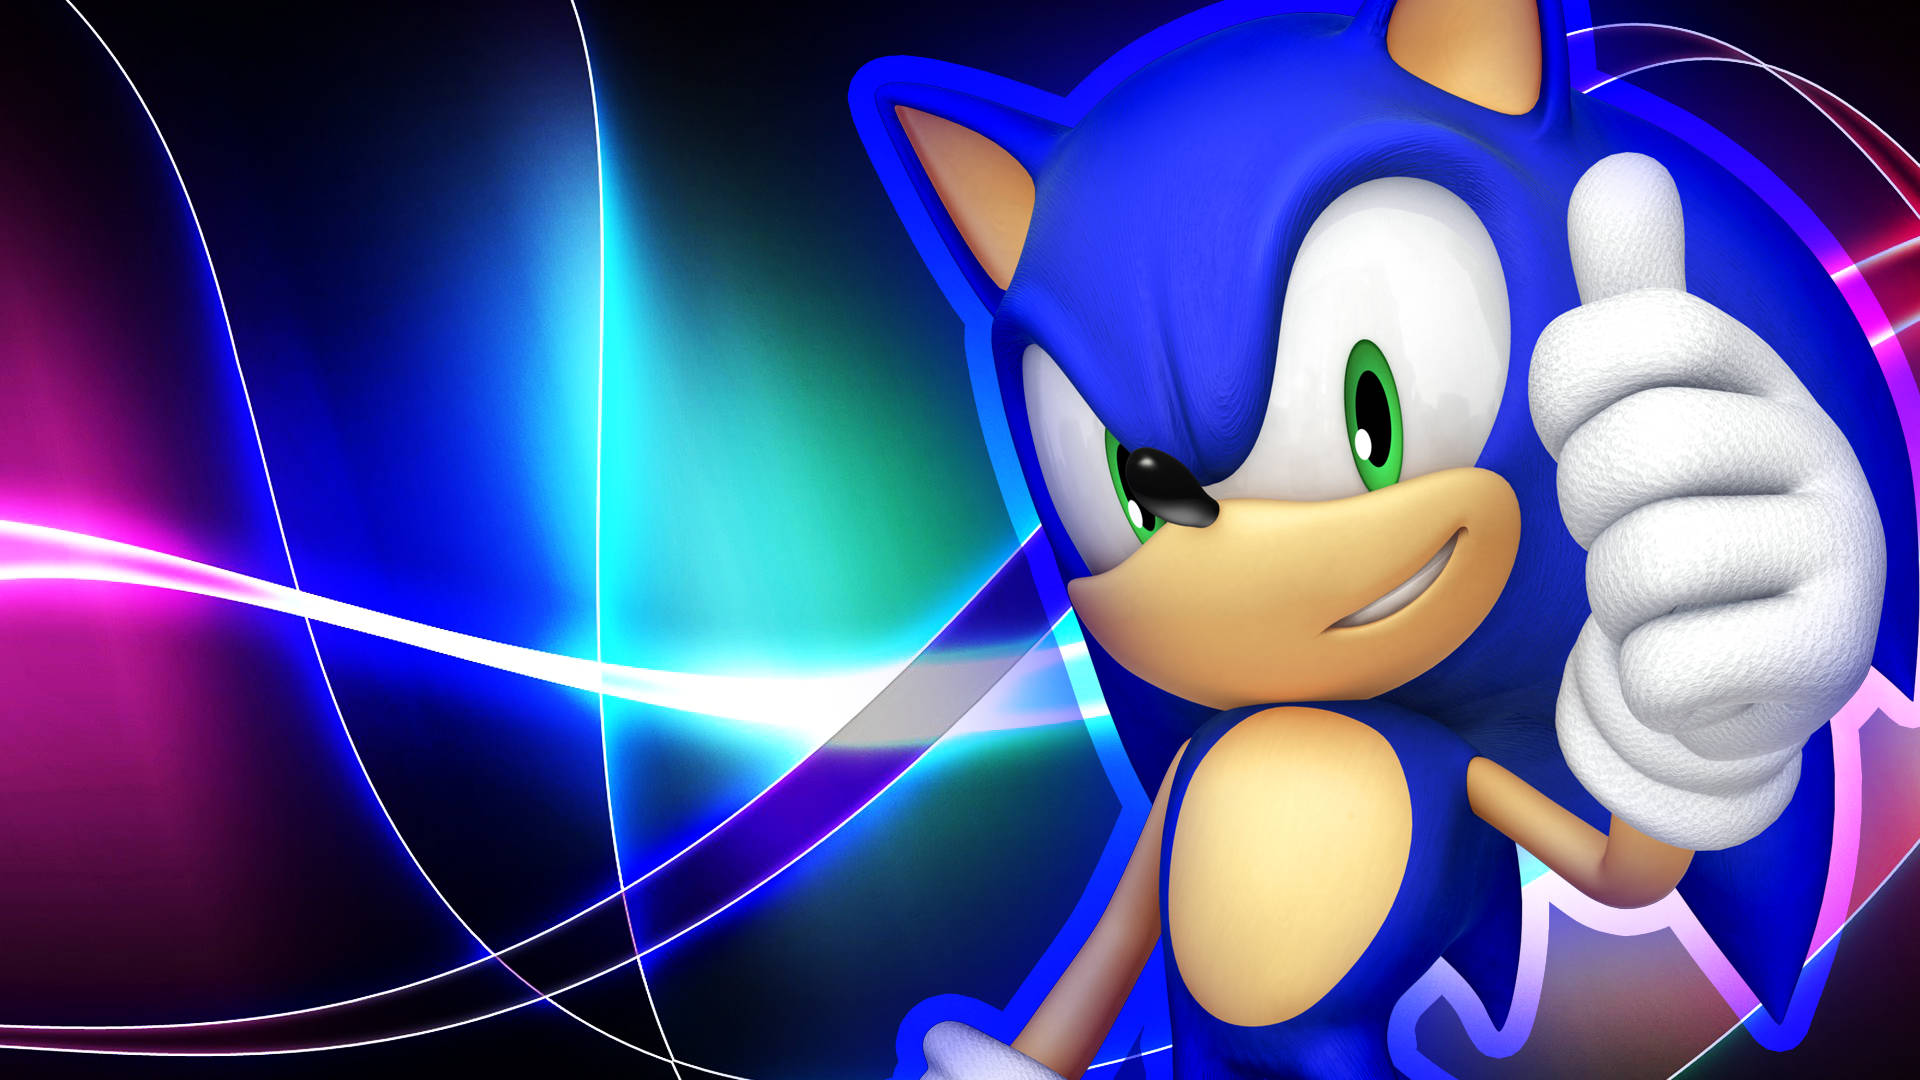 Sonic Thumbs Up Profile Picture Wallpaper